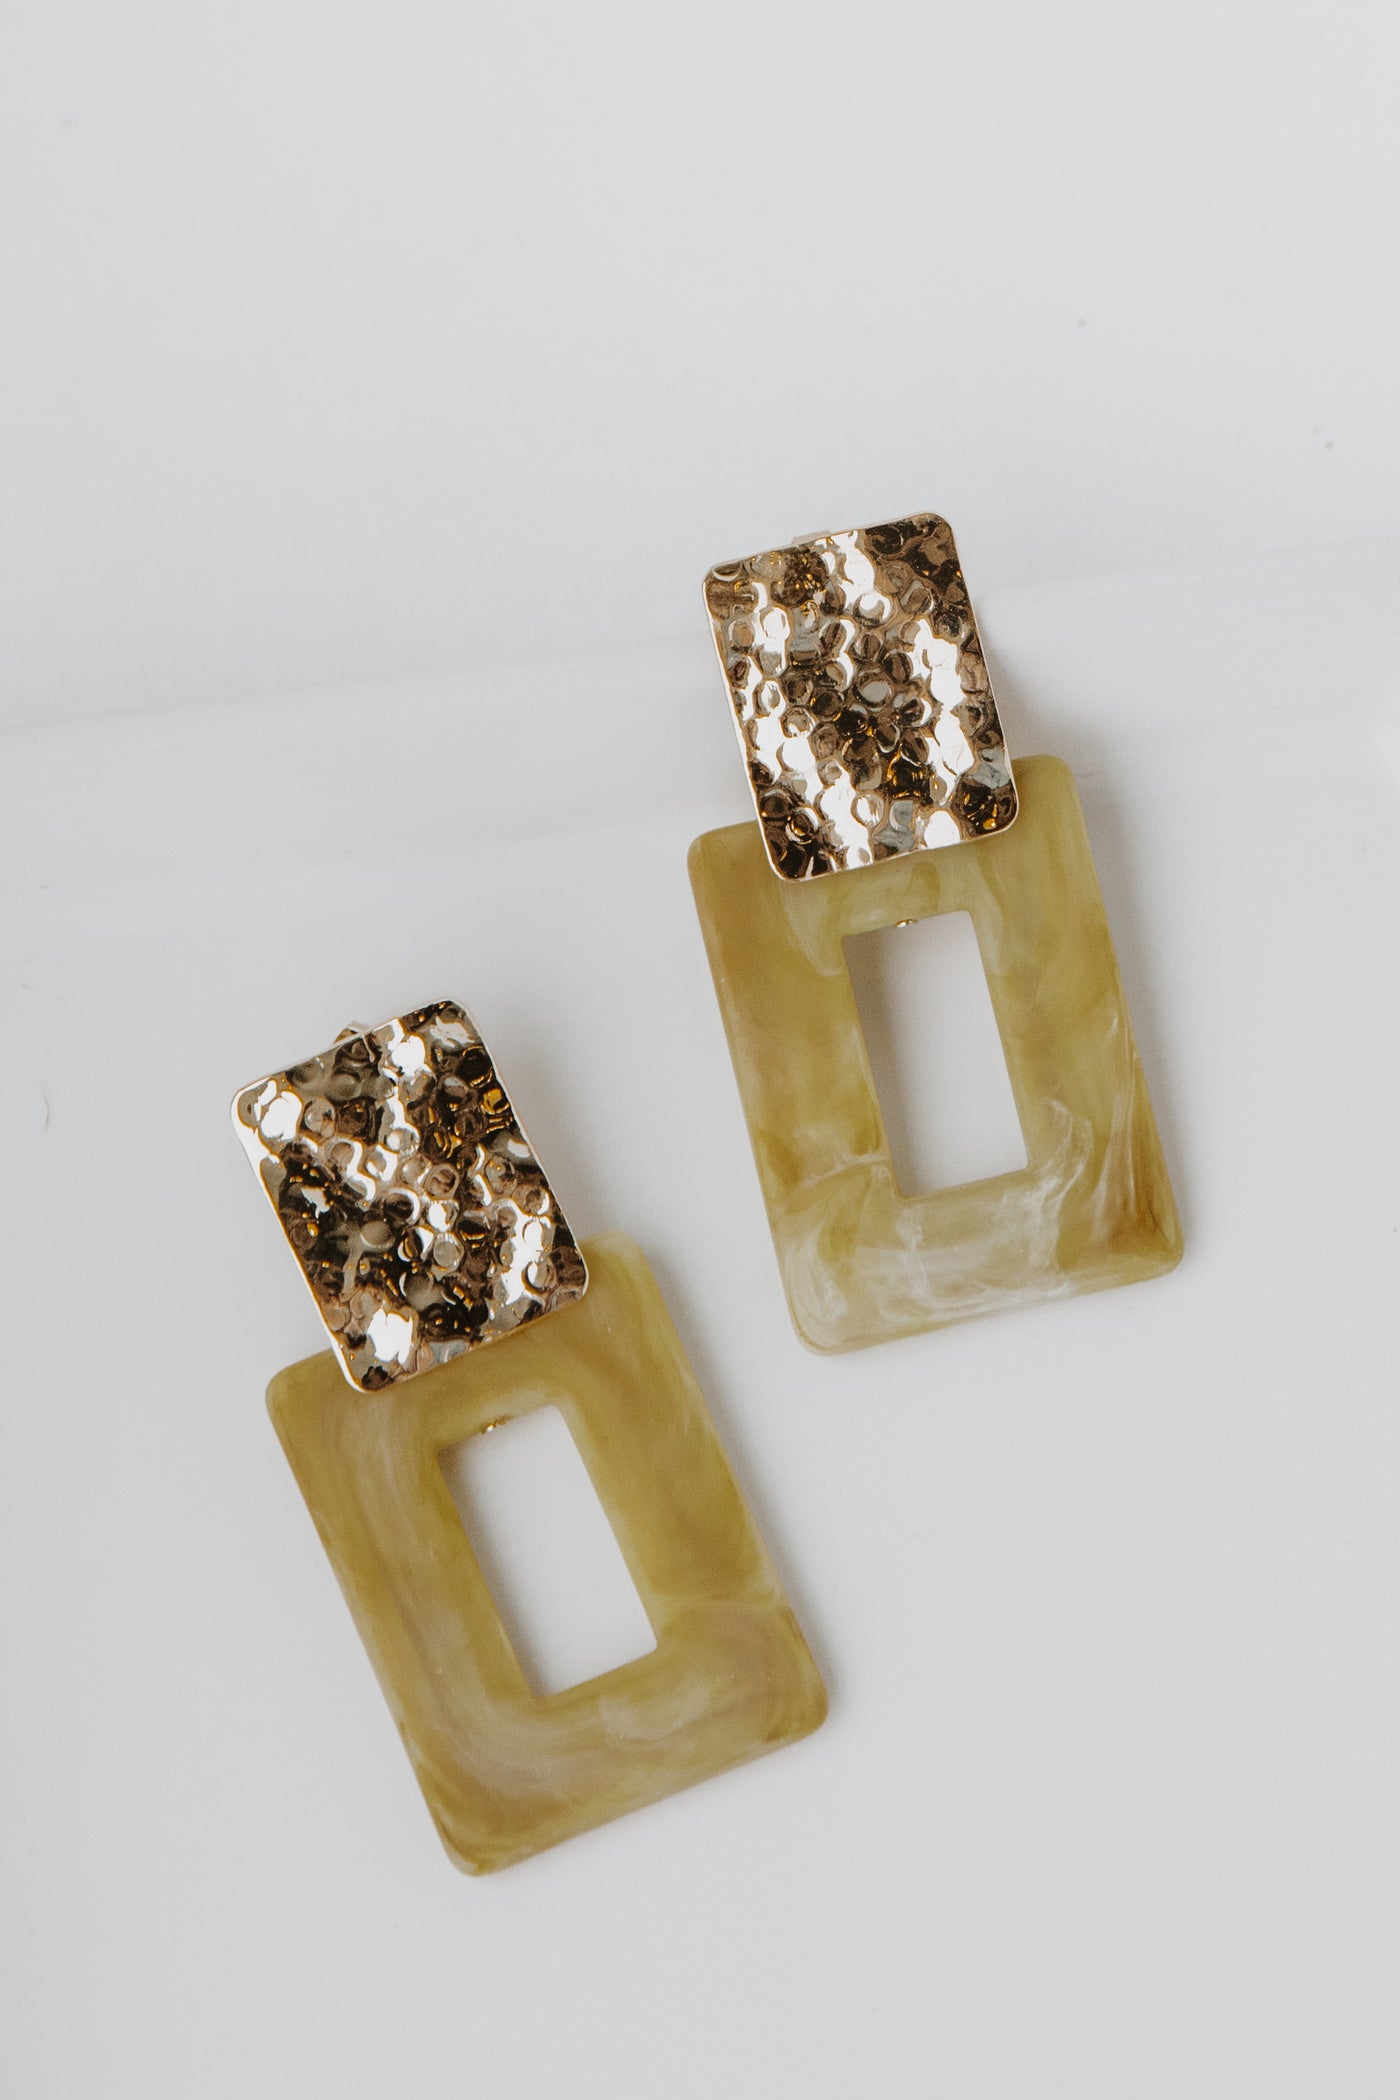 Acrylic Statement Earrings in taupe flat lay